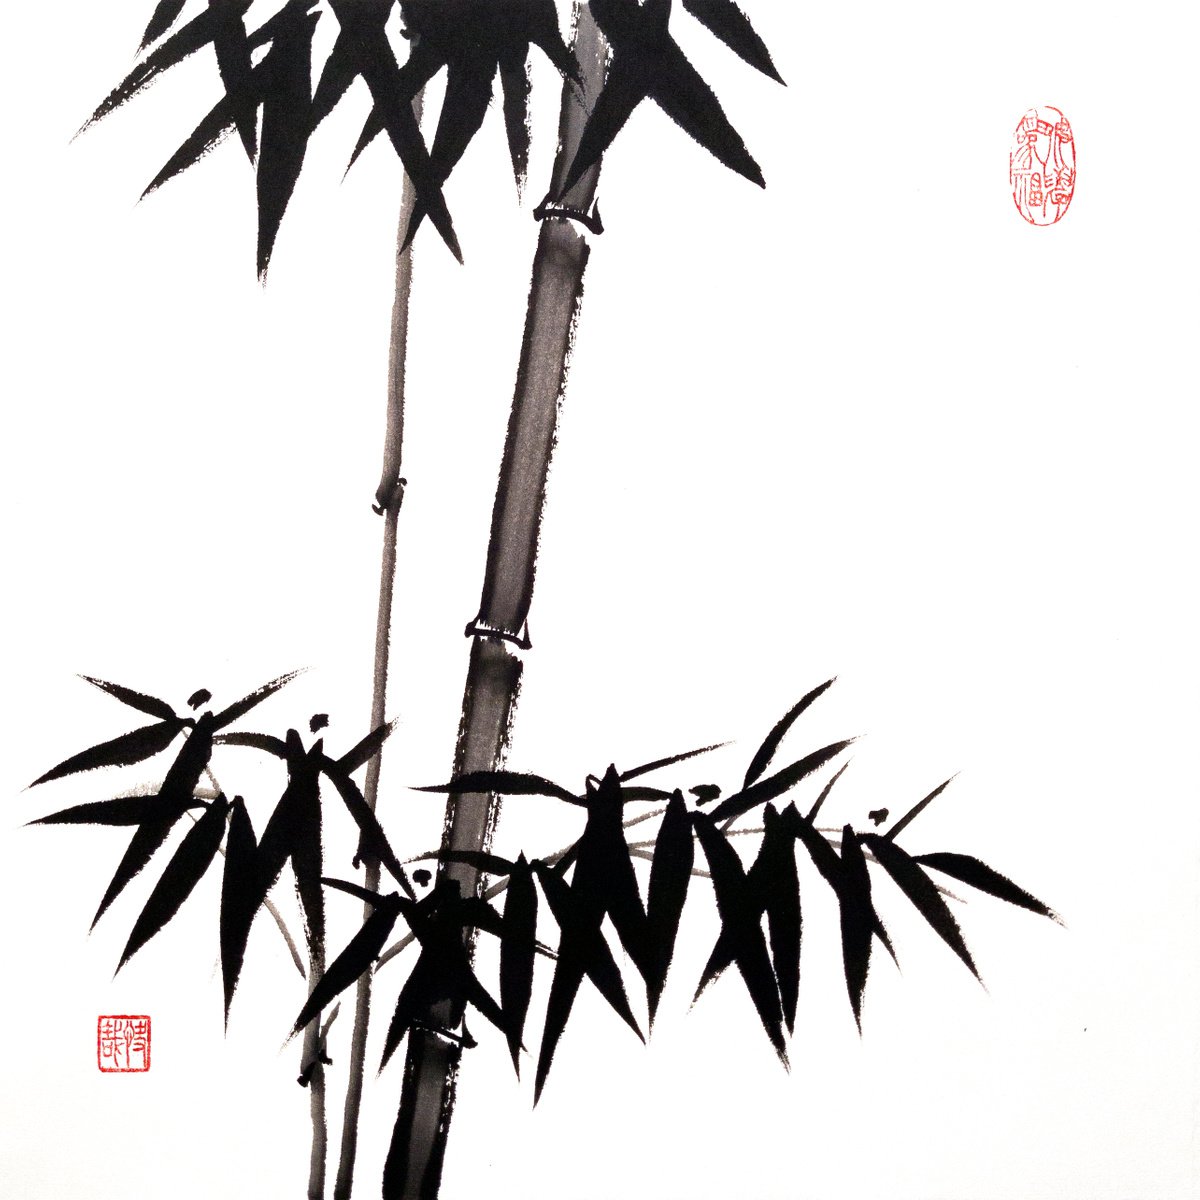 Two bamboo branches - Bamboo series No. 2122 - Oriental Chinese Ink Painting by Ilana Shechter